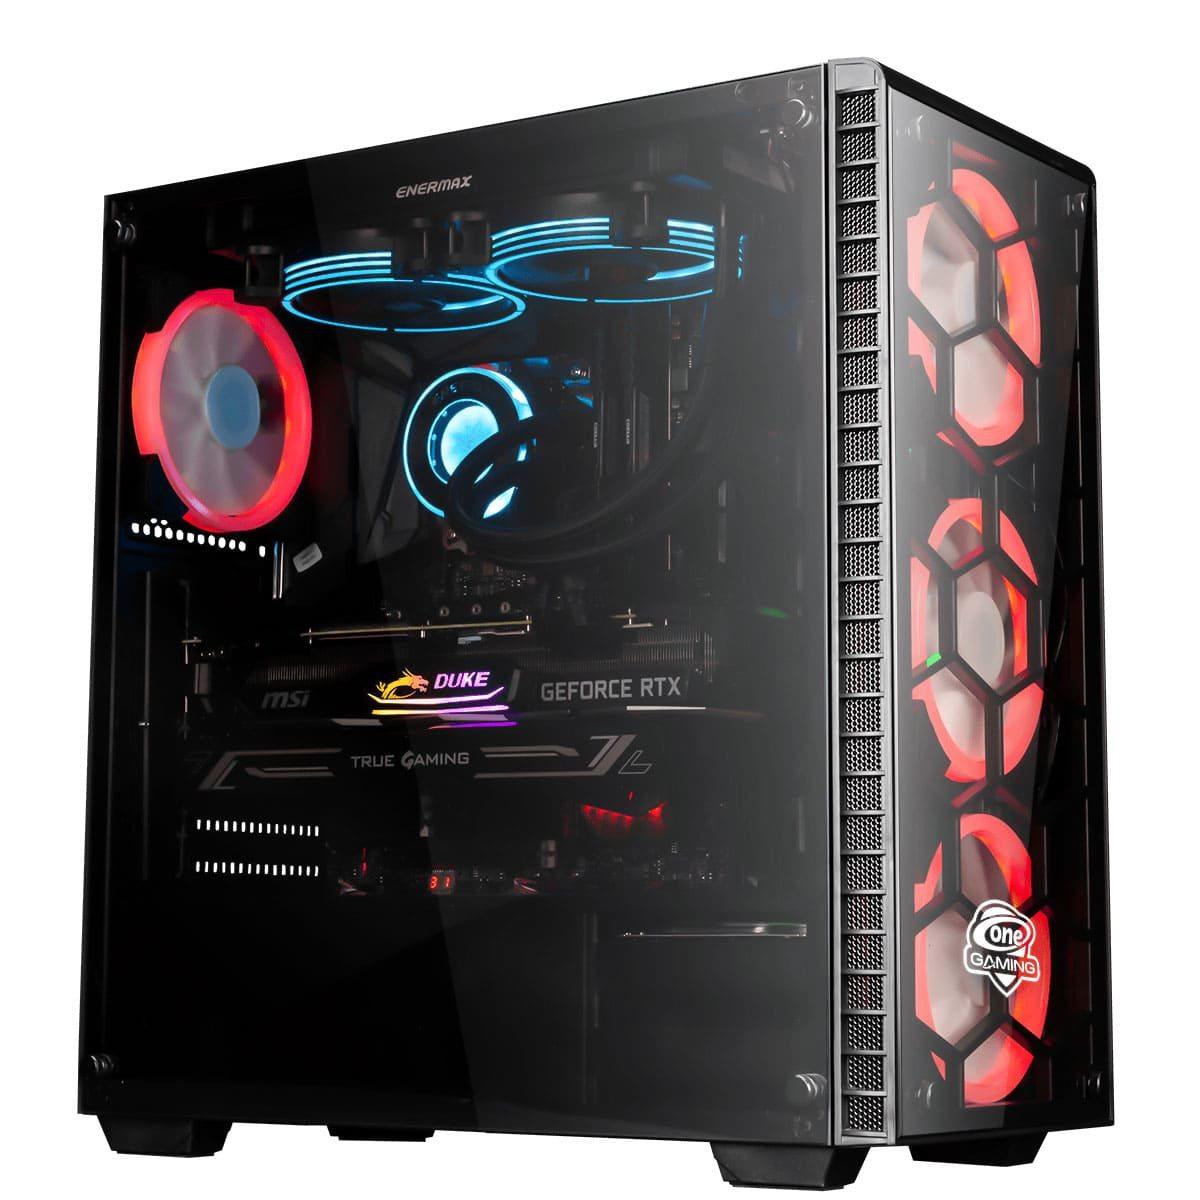 Gaming PC Premium AN11 powered by ASUS - Ryzen 5 PRO 4650G - RTX 3060 Ti